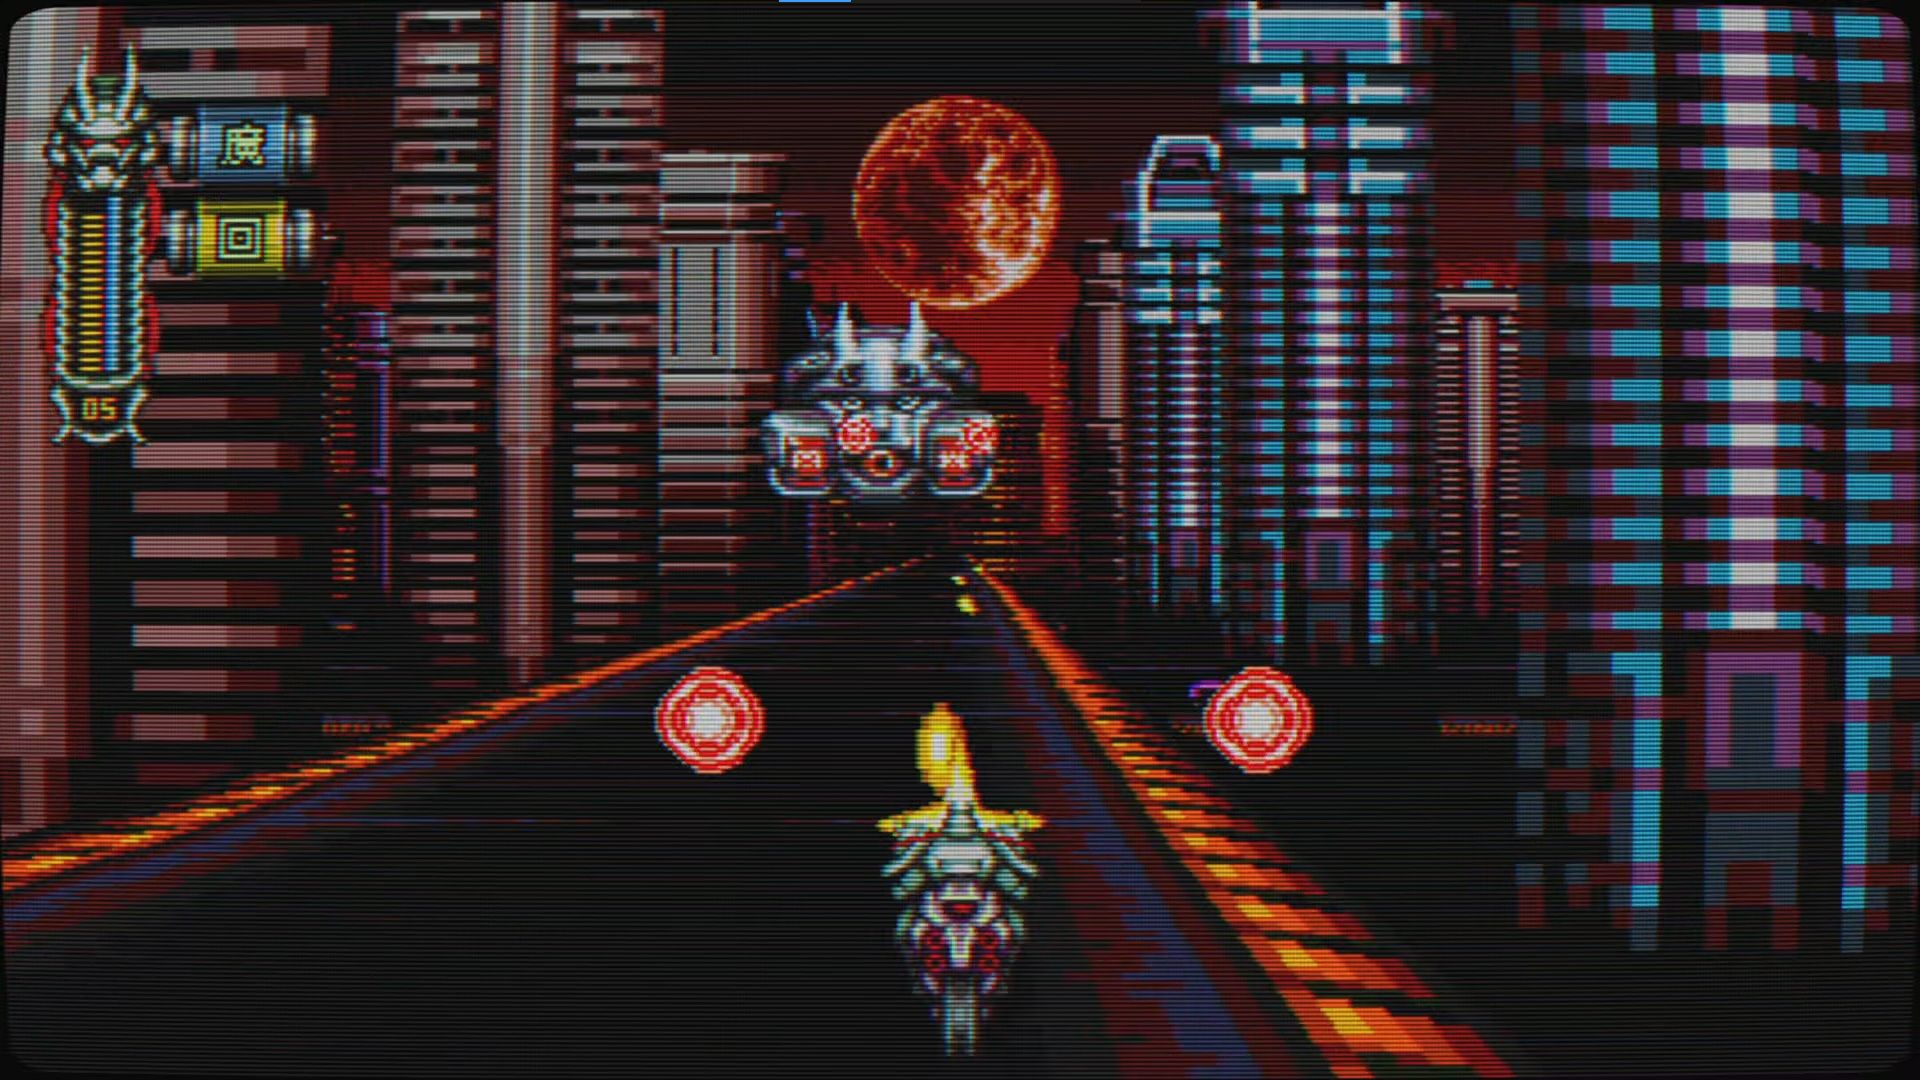 Vengeful Guardian Moonrider, Iwondonilo City, Main Motorcycle Boss Shooting On Either Side Of The Guardian